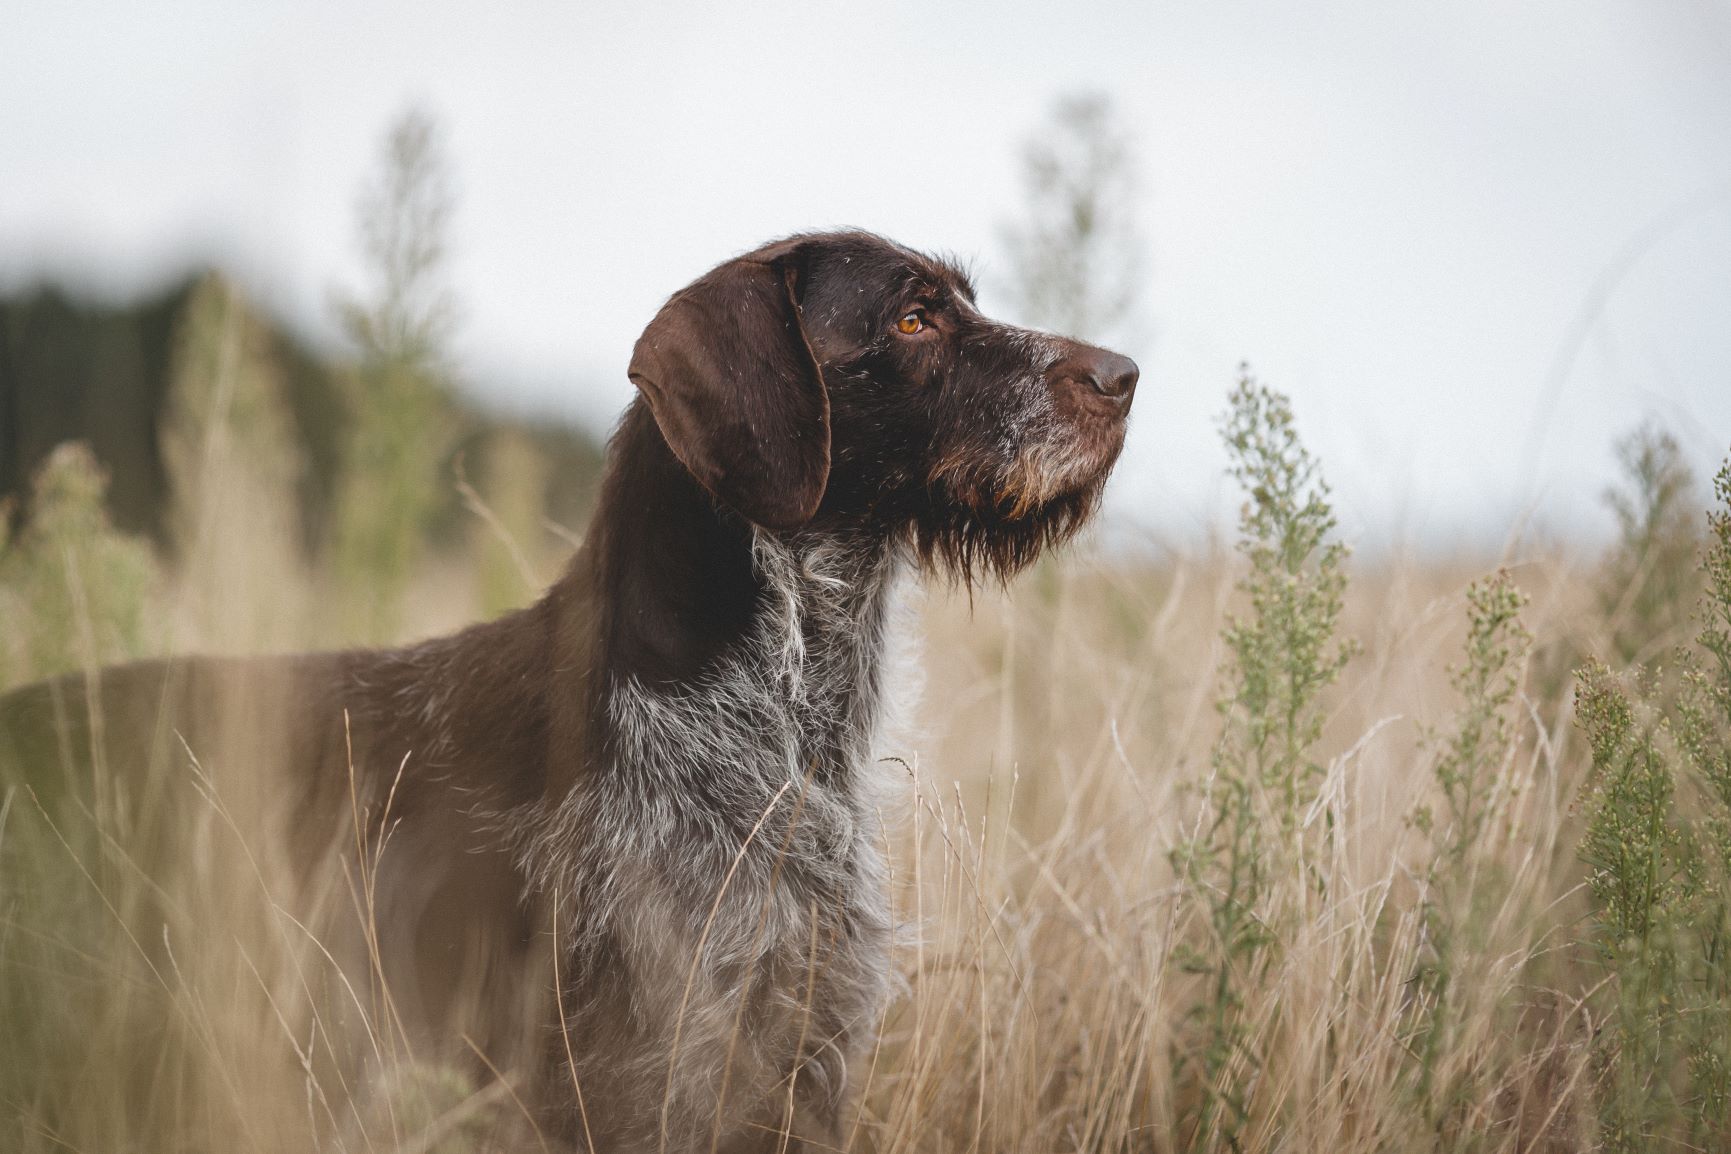 German Shorthairs vs. Wirehairs: It's not just about the coat